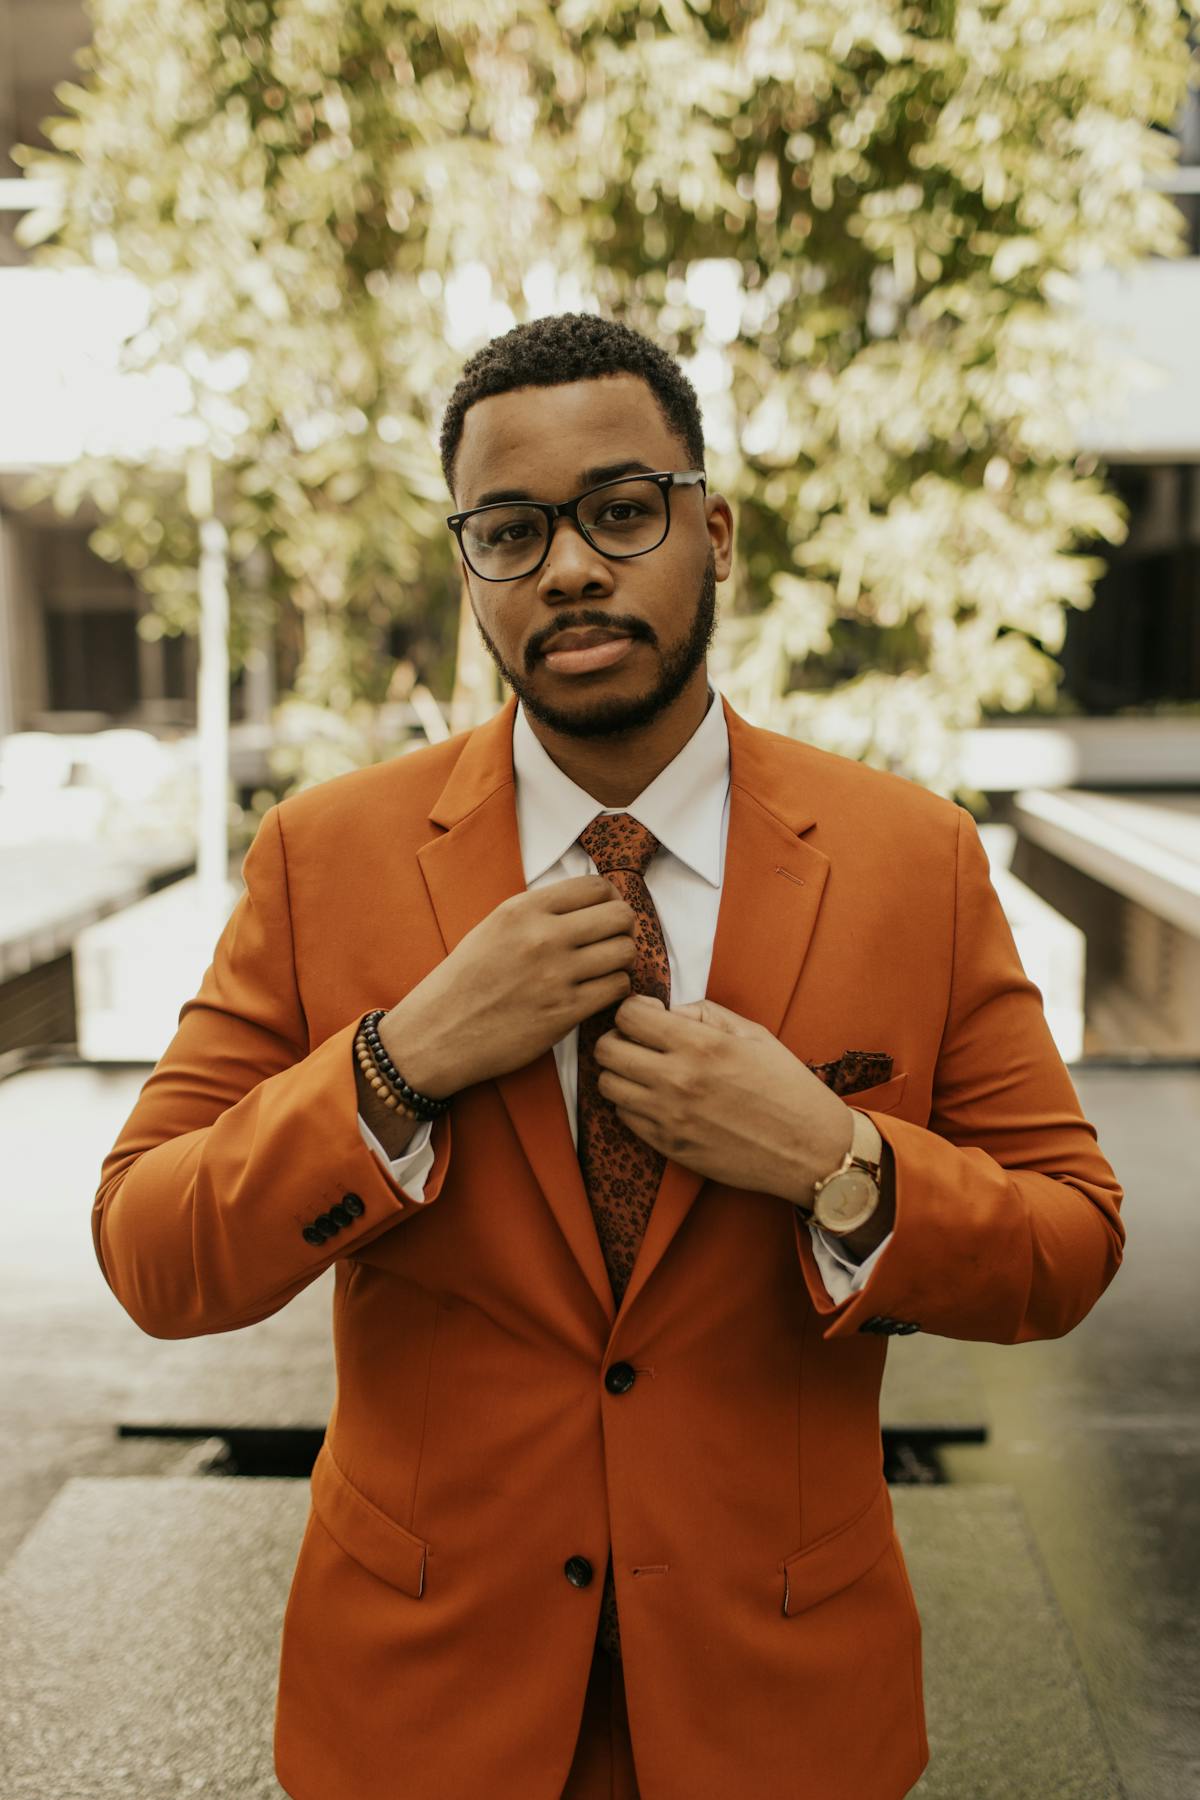 Rust orange suit outfit for cocktail dress code wedding with tie, watch, and glasses.